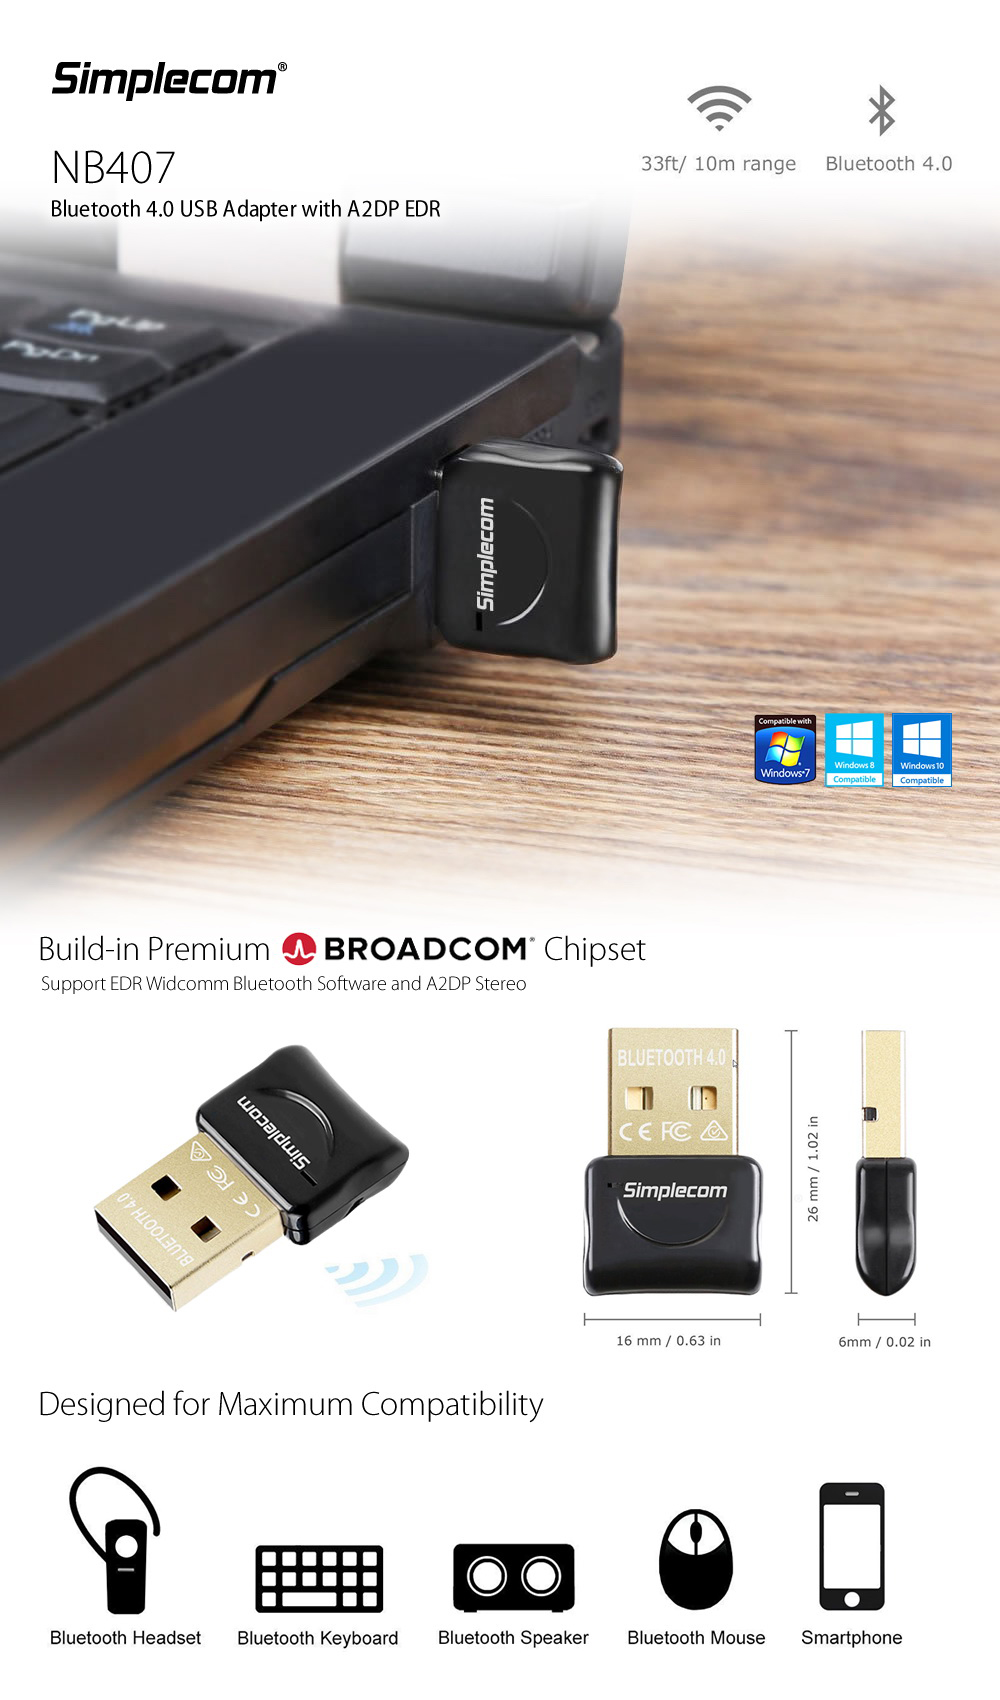 Bluetooth-Adapters-Simplecom-NB407-USB-Bluetooth-4-0-Adapter-with-A2DP-EDR-2